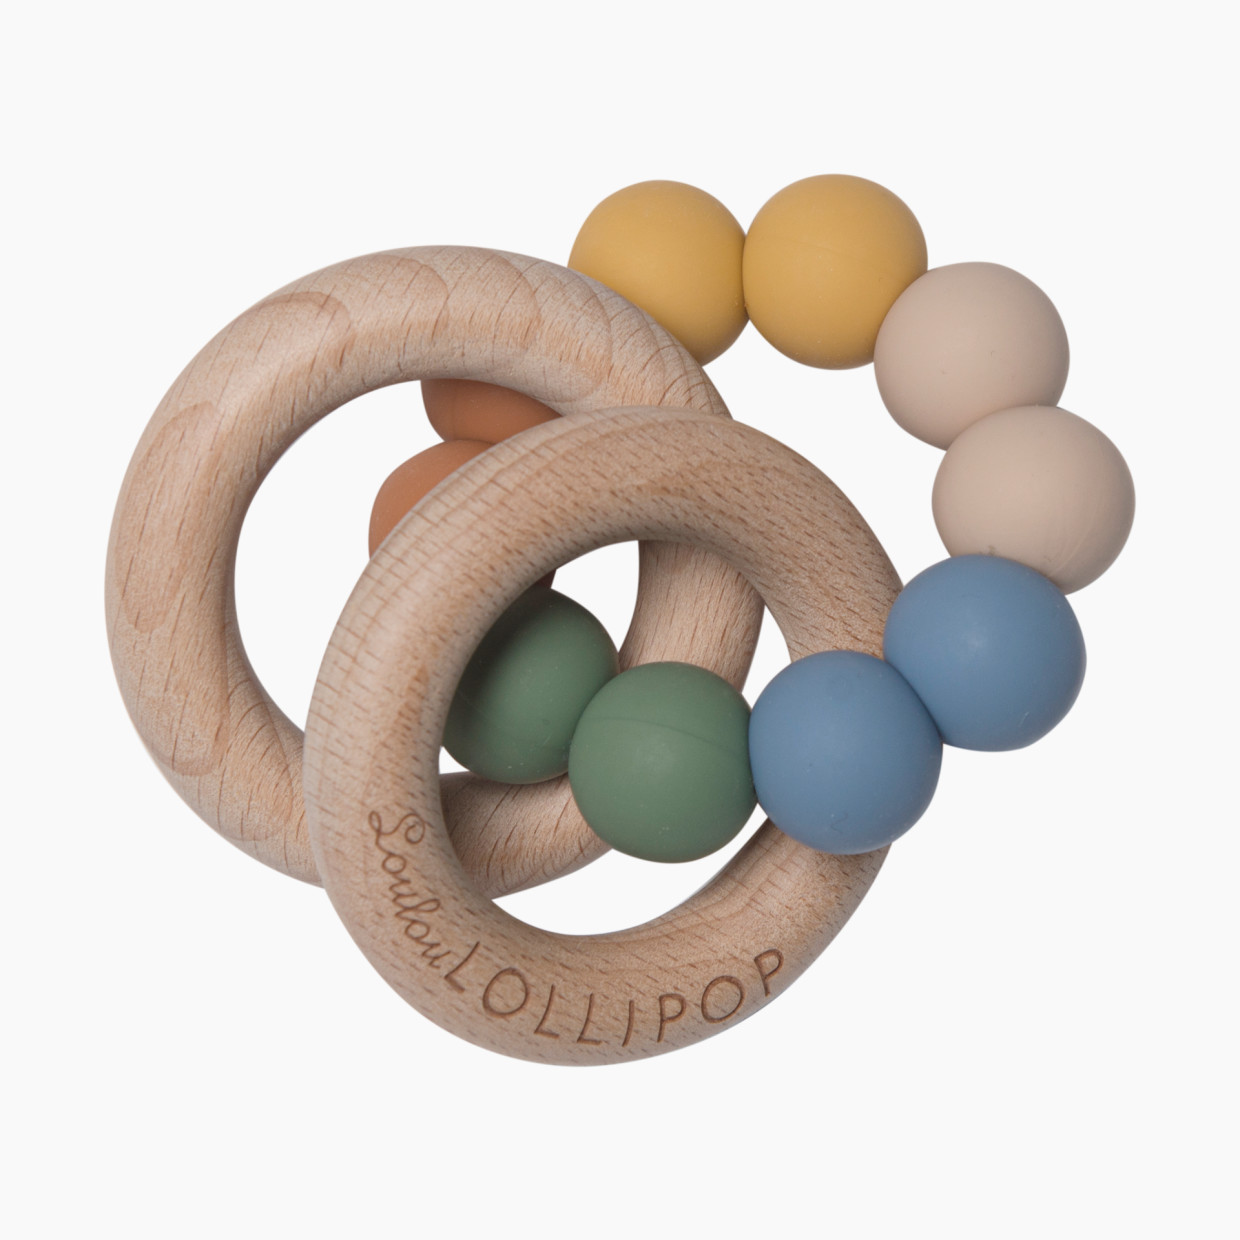 Loulou Lollipop Loulou Lollipop x Babylist Bubble Silicone & Wood Teething Rattle - Modern Primary Multi.